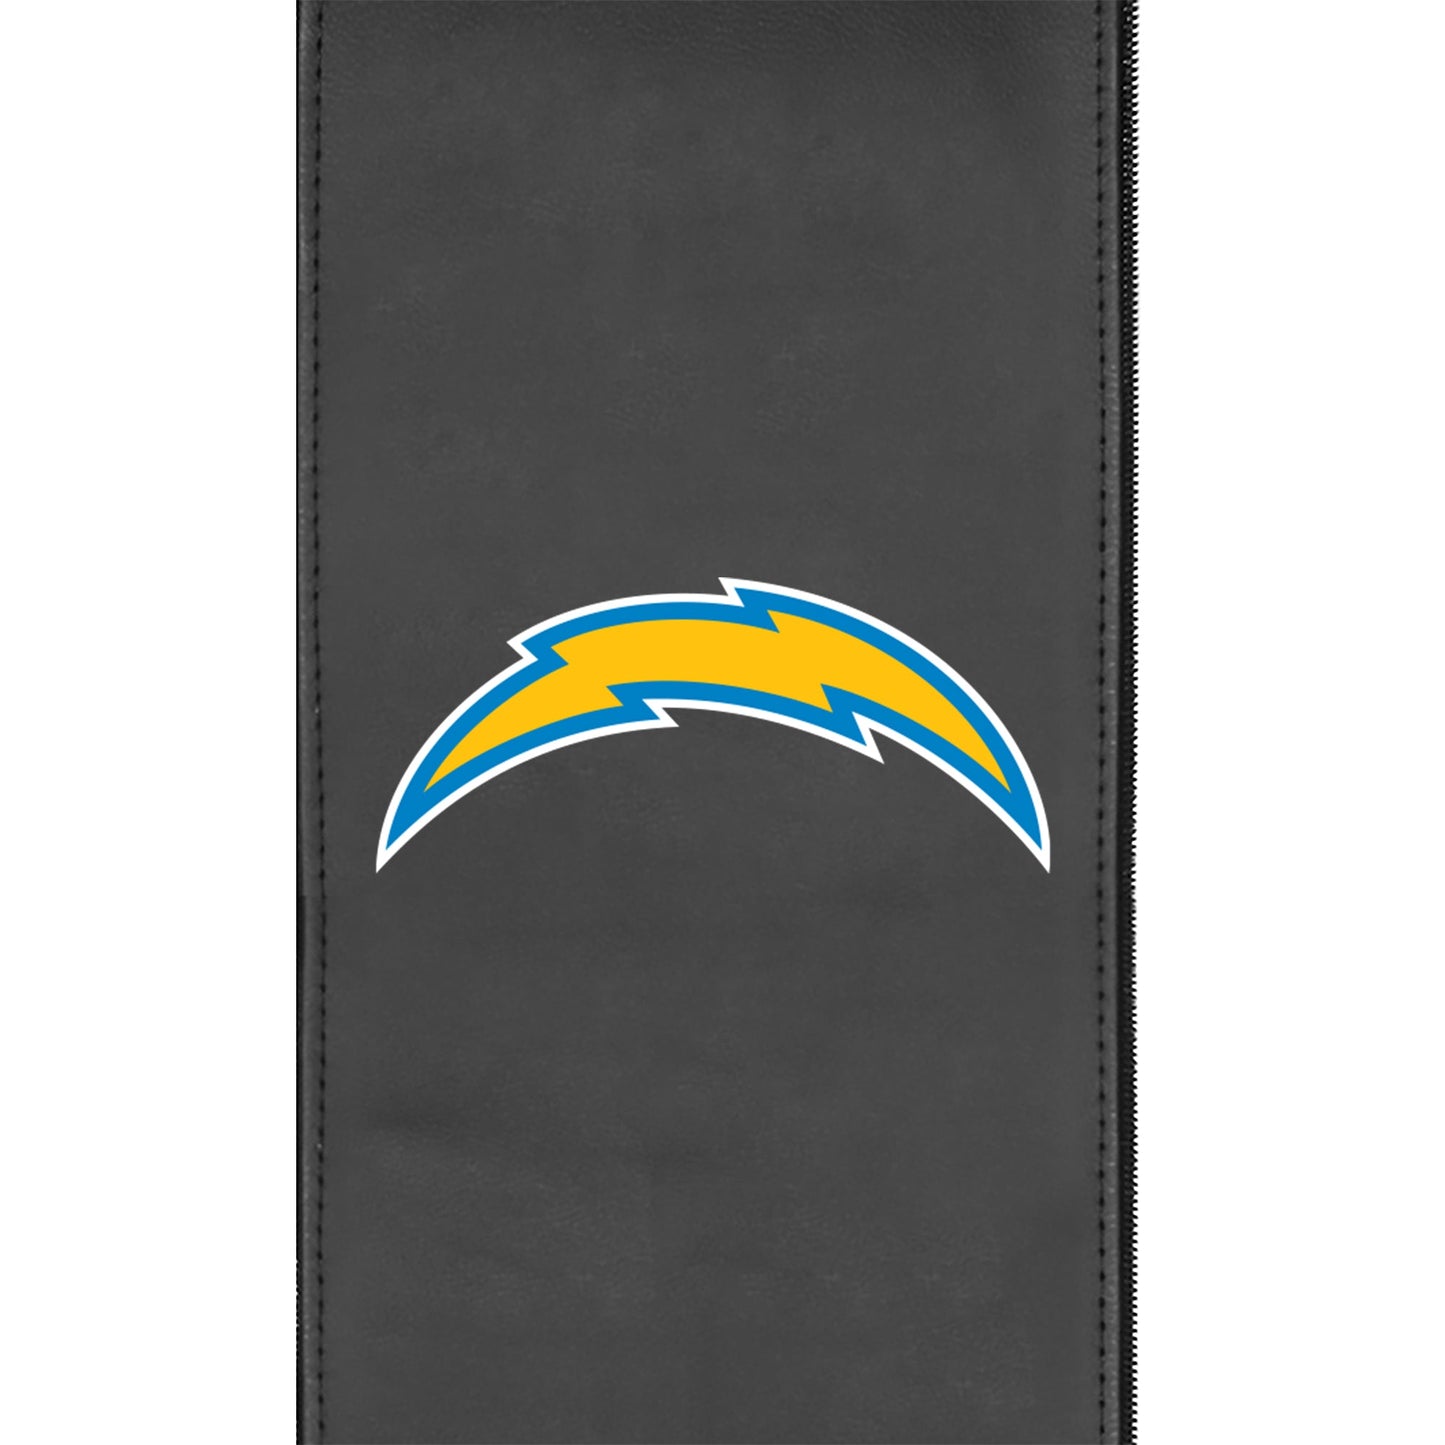 Stealth Power Plus Recliner with Los Angeles Chargers Primary Logo